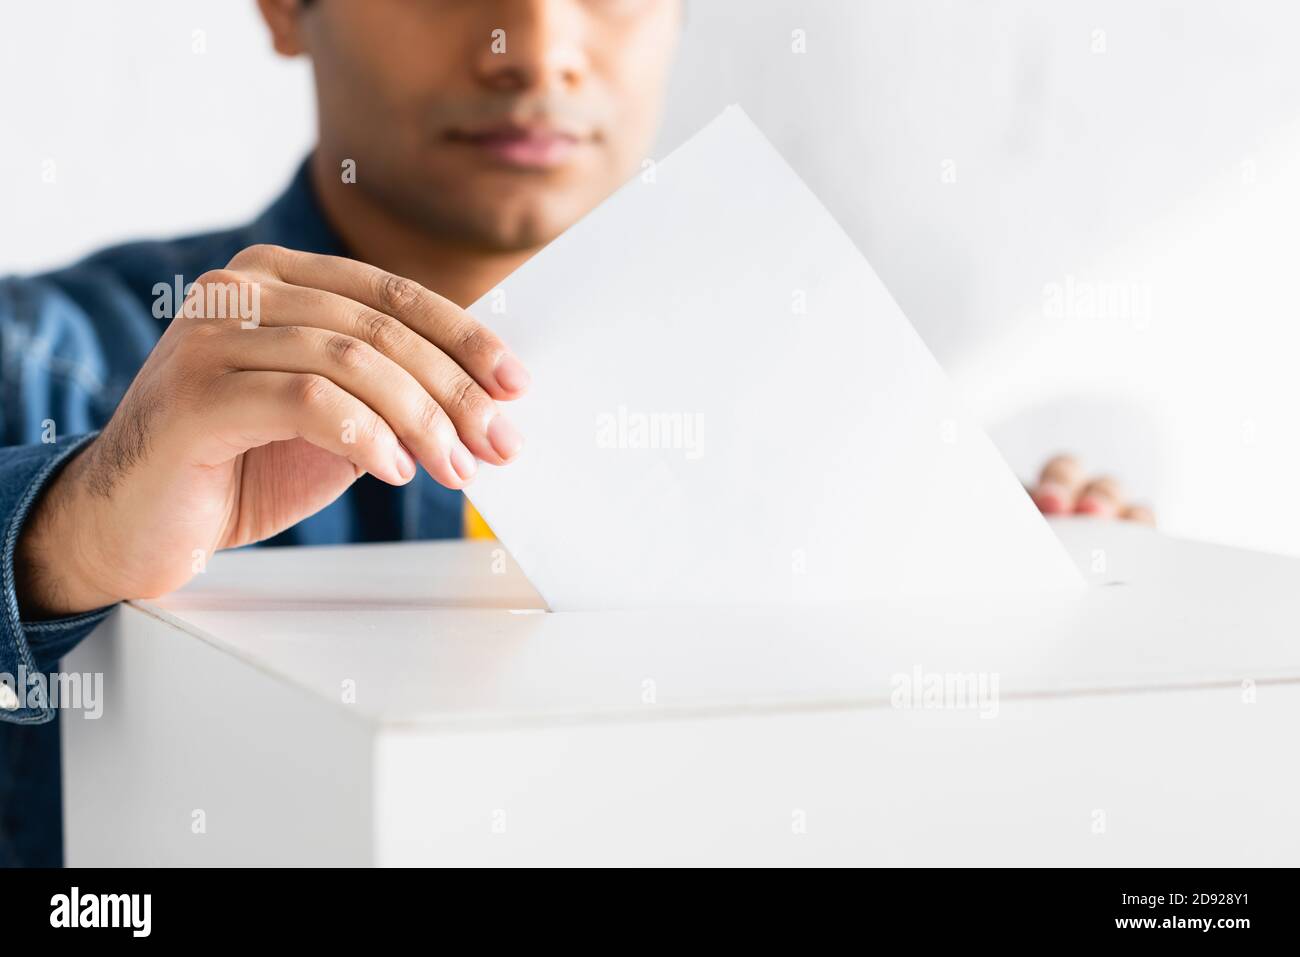 cropped view of indian man inserting ballot into polling booth Stock Photo